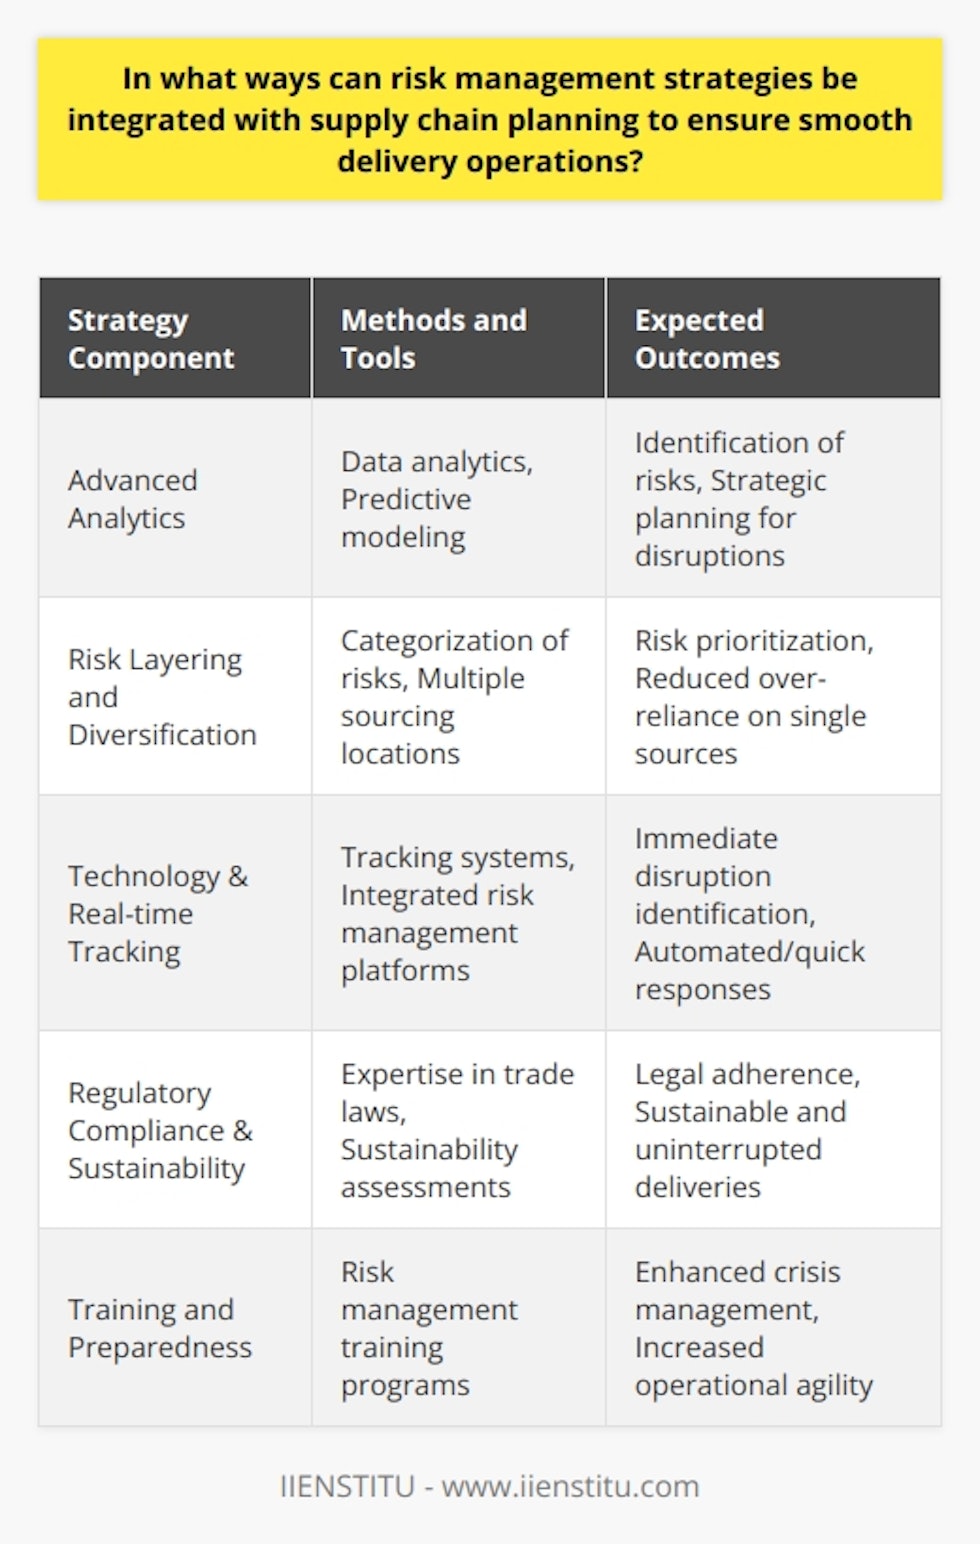 Integrating risk management strategies with supply chain planning is a multi-faceted approach that helps safeguard against disruptions and ensure the smooth execution of delivery operations. The effectiveness of such integration hinges on clear methodologies and continuous innovation to tackle the complexity inherent in today's globalized supply chains.One pioneering approach in this realm, adopted by organizations like IIENSTITU, is to blend advanced analytics with expert-driven insights. Utilizing data analytics tools aids in unearthing not just obvious risks but also subtle nuances that might lead to supply chain vulnerabilities. Companies now increasingly rely on predictive modeling to anticipate possible disruptions and strategize accordingly.Risk Layering and DiversificationWithin the domain of risk management in supply chains, the concept of risk layering becomes prominent. Risk layering involves categorizing risks based on probabilities and impacts, which then shapes the prioritization of response plans. Additionally, diversification strategies, such as sourcing from multiple geographic locations and vendors, are crucial in mitigating the risk of over-reliance on any single source or logistics pathway.Technology Adoption and IntegrationModern risk management also requires a technology-forward approach. The role of real-time tracking systems, for instance, cannot be emphasized enough. These technologies allow for the immediate identification of delays and disruptions, triggering automated responses or quick human interventions. Integrated systems that house all risk-related data and facilitate rapid communication between stakeholders are paramount for responsive supply chain management.Regulatory Compliance and SustainabilityBeyond immediate operational concerns, regulatory compliance and sustainability also form the bedrock of contemporary risk strategies. Navigating the intricate web of international trade laws and environmental regulations requires expertise and thorough planning. Assessing the legal and sustainability risks pre-emptively helps ensure uninterrupted deliveries while also adhering to corporate social responsibility mandates.Training and PreparednessEqually important to state-of-the-art systems and strategies is human capital. Training programs designed to instill a deep understanding of risk assessment, mitigation, and response in personnel are investments in the smooth operation of the supply chain. Such training cultivates a preparedness culture, enabling teams to handle crises with agility and informed confidence.In essence, the integration of risk management and supply chain planning is an ongoing, dynamic process that necessitates a blend of advanced analytics, diversification, technological solutions, emphasis on regulatory and sustainability issues, and comprehensive training programs. When executed proficiently, this integration not only minimizes the impact of disruptions but also contributes to a system designed for resilience and efficient delivery operations.